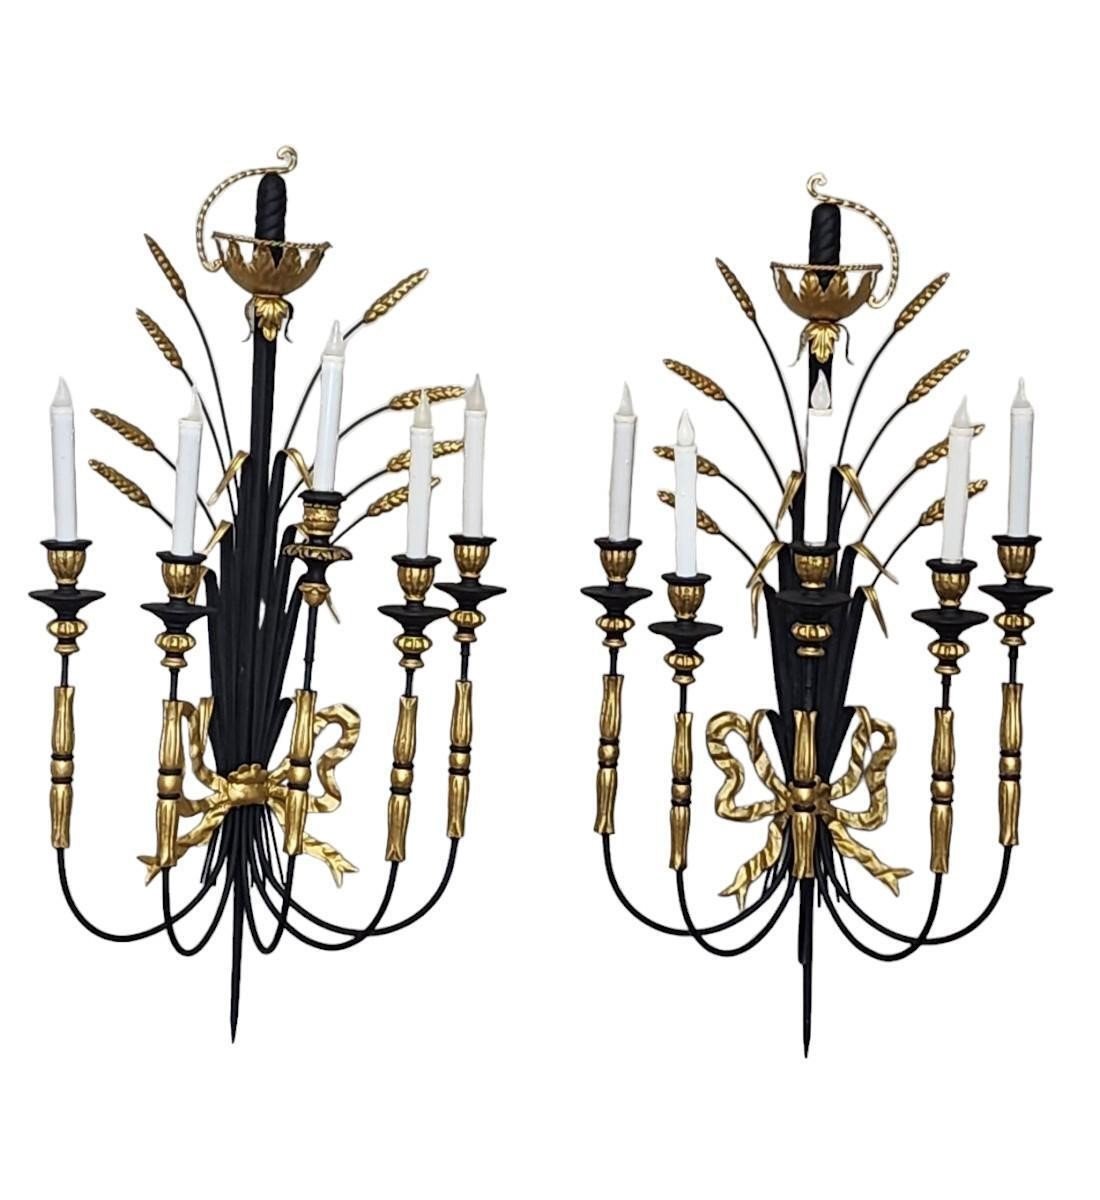 A Nice Pair Of Vintage Wrought Iron Wall Sconces 5